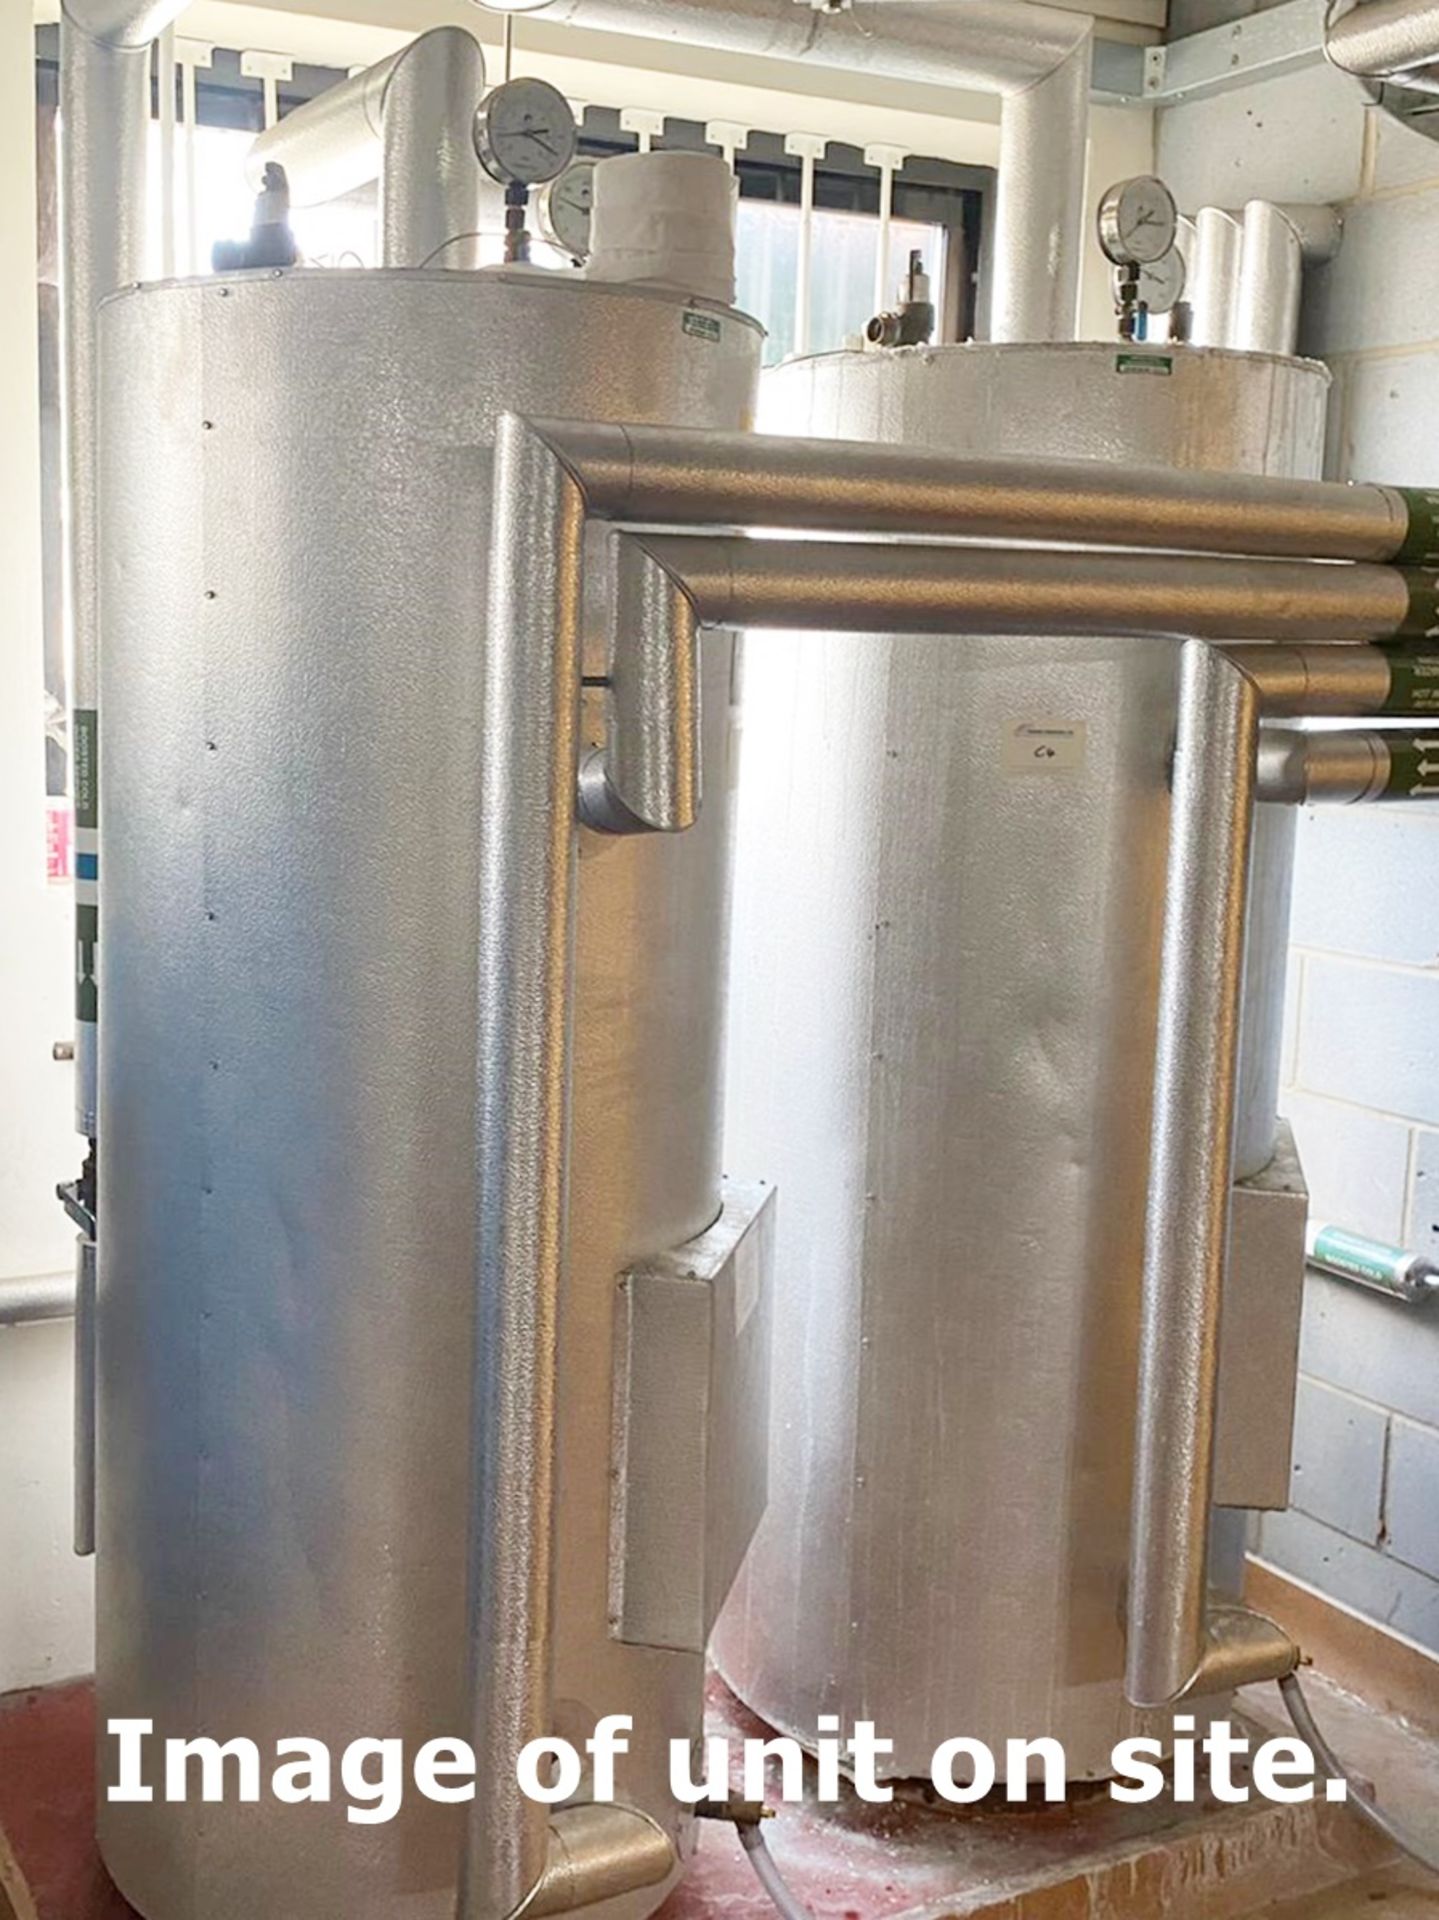 Large Quantity of Thermal Pipe Covering Contents of Two Upright Cabinets - Cabinets Not Included - - Image 5 of 10